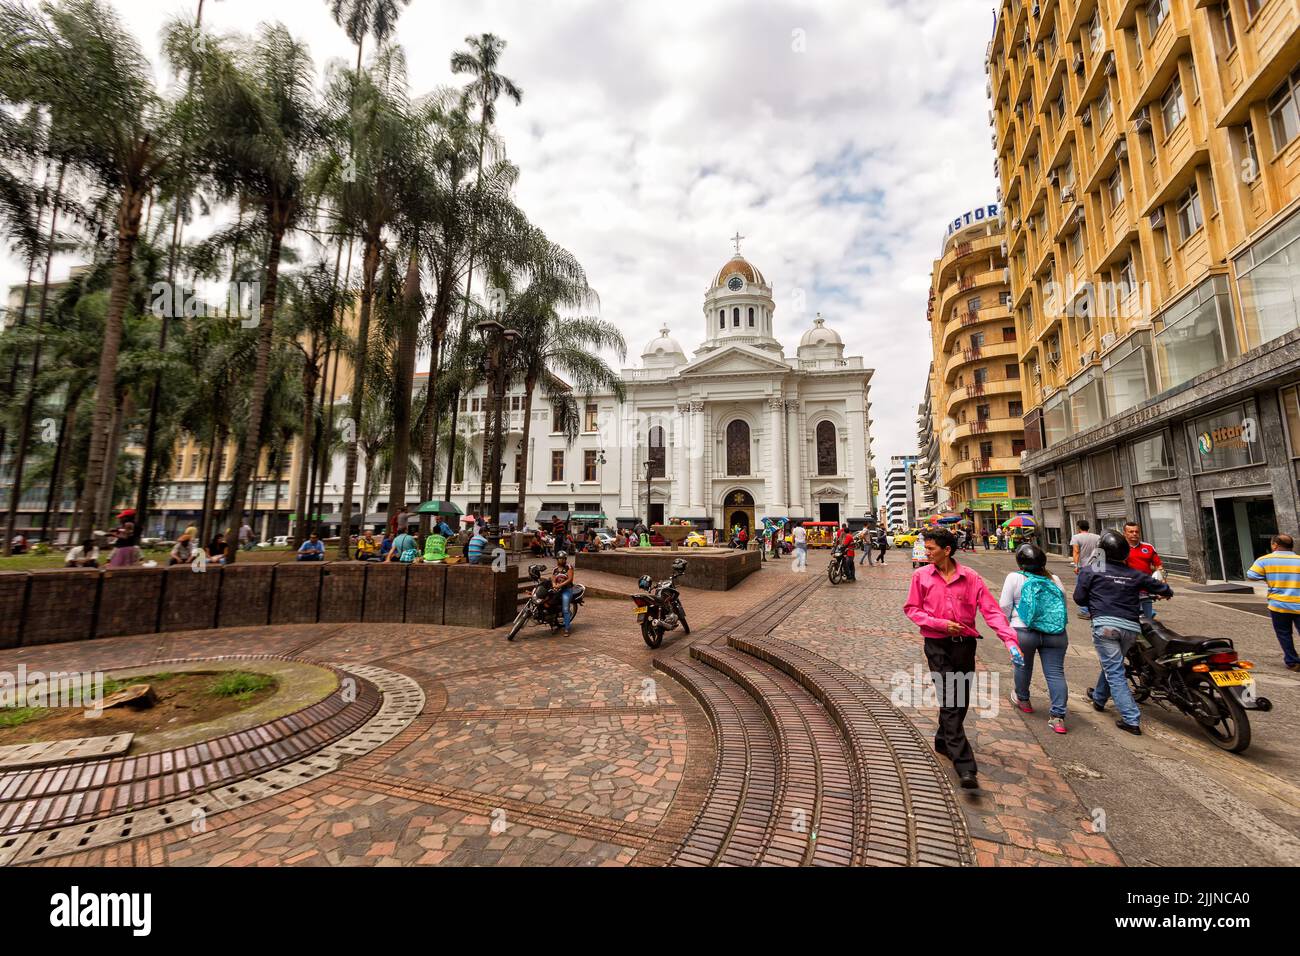 The people walking through the Plaza de Caicedo in Cali, Colombia on June 10, 2016. Stock Photo